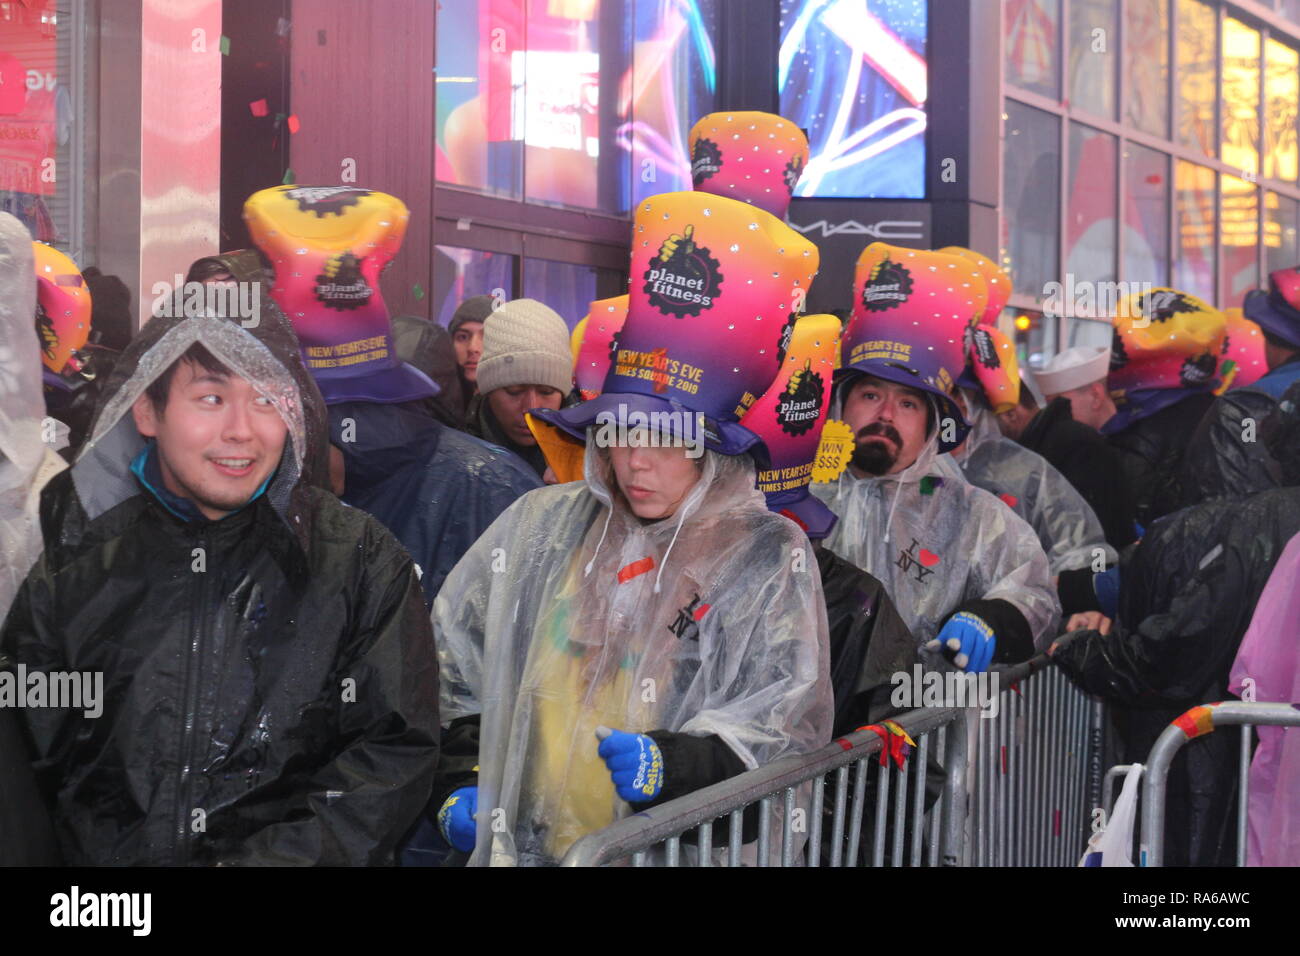 Participants are seen at the Times Square during the New Year's Eve celebrations. Despite all day rain, More than 2 million people participate at the New Year's Eve celebrations at the Times Square. Stock Photo